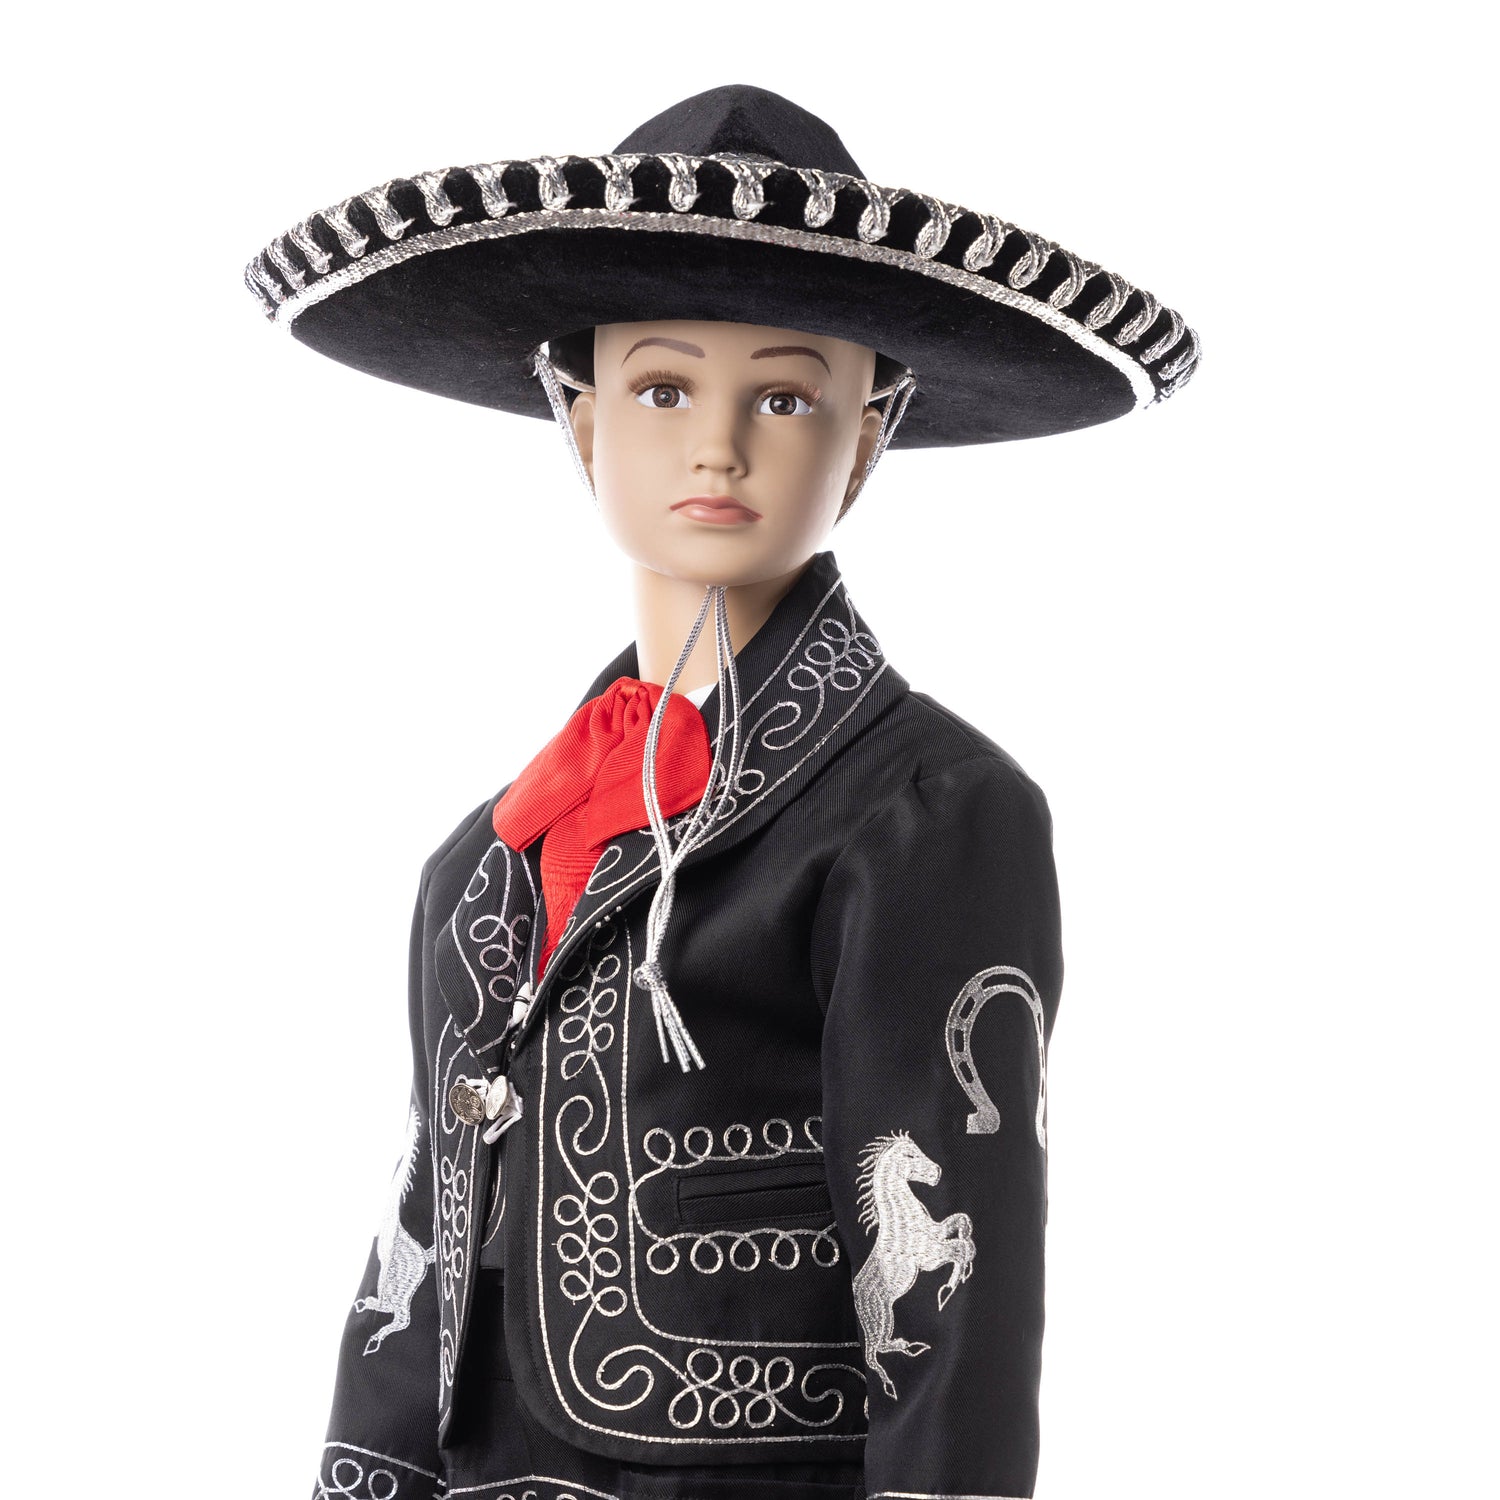 A Small History Into The Charro Outfit